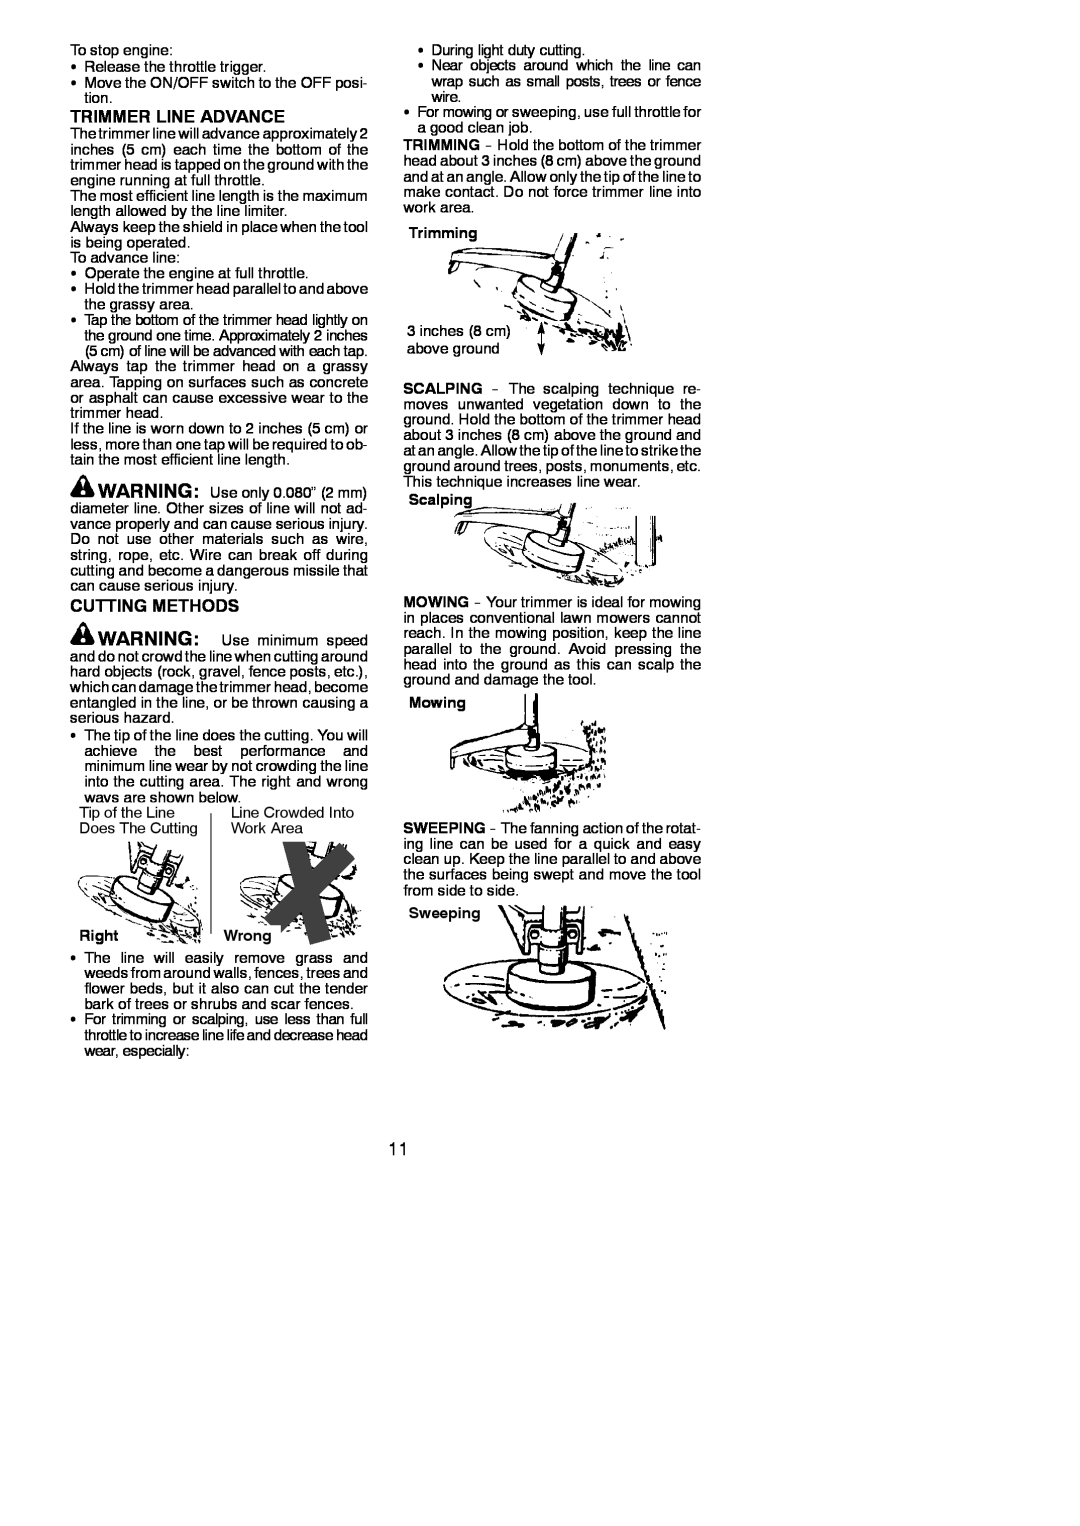 Poulan PP036 instruction manual Trimmer Line Advance, Cutting Methods, RightWrong, Trimming, Scalping, Mowing, Sweeping 